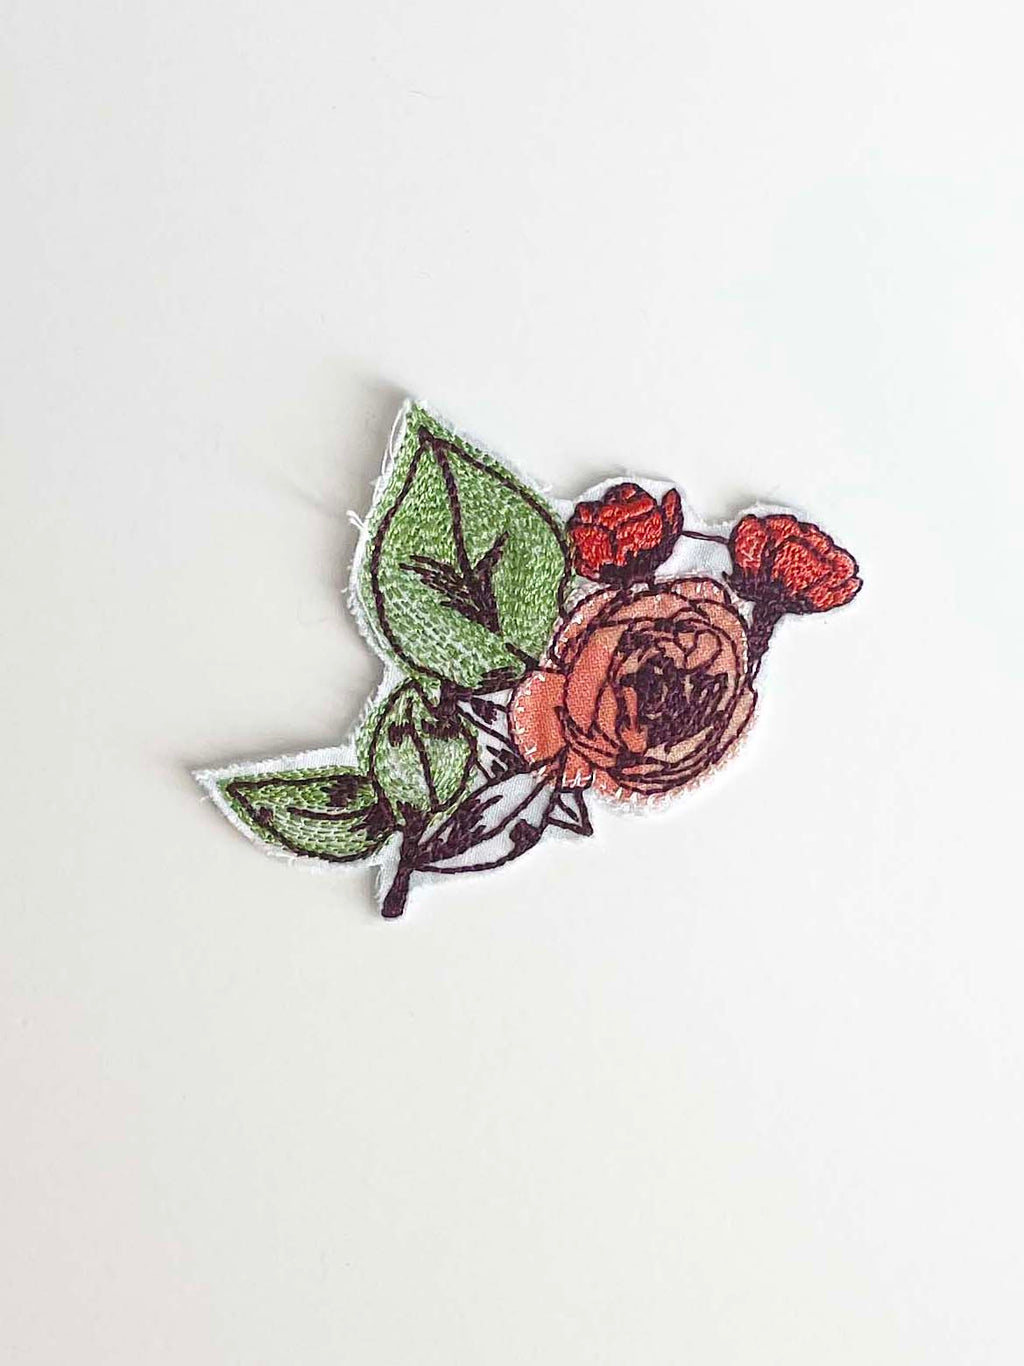 Machine embroidered rose bush in shades of burnt orange, burgundy, and bright green Upcycled ombre peach fabric completes the flower. 